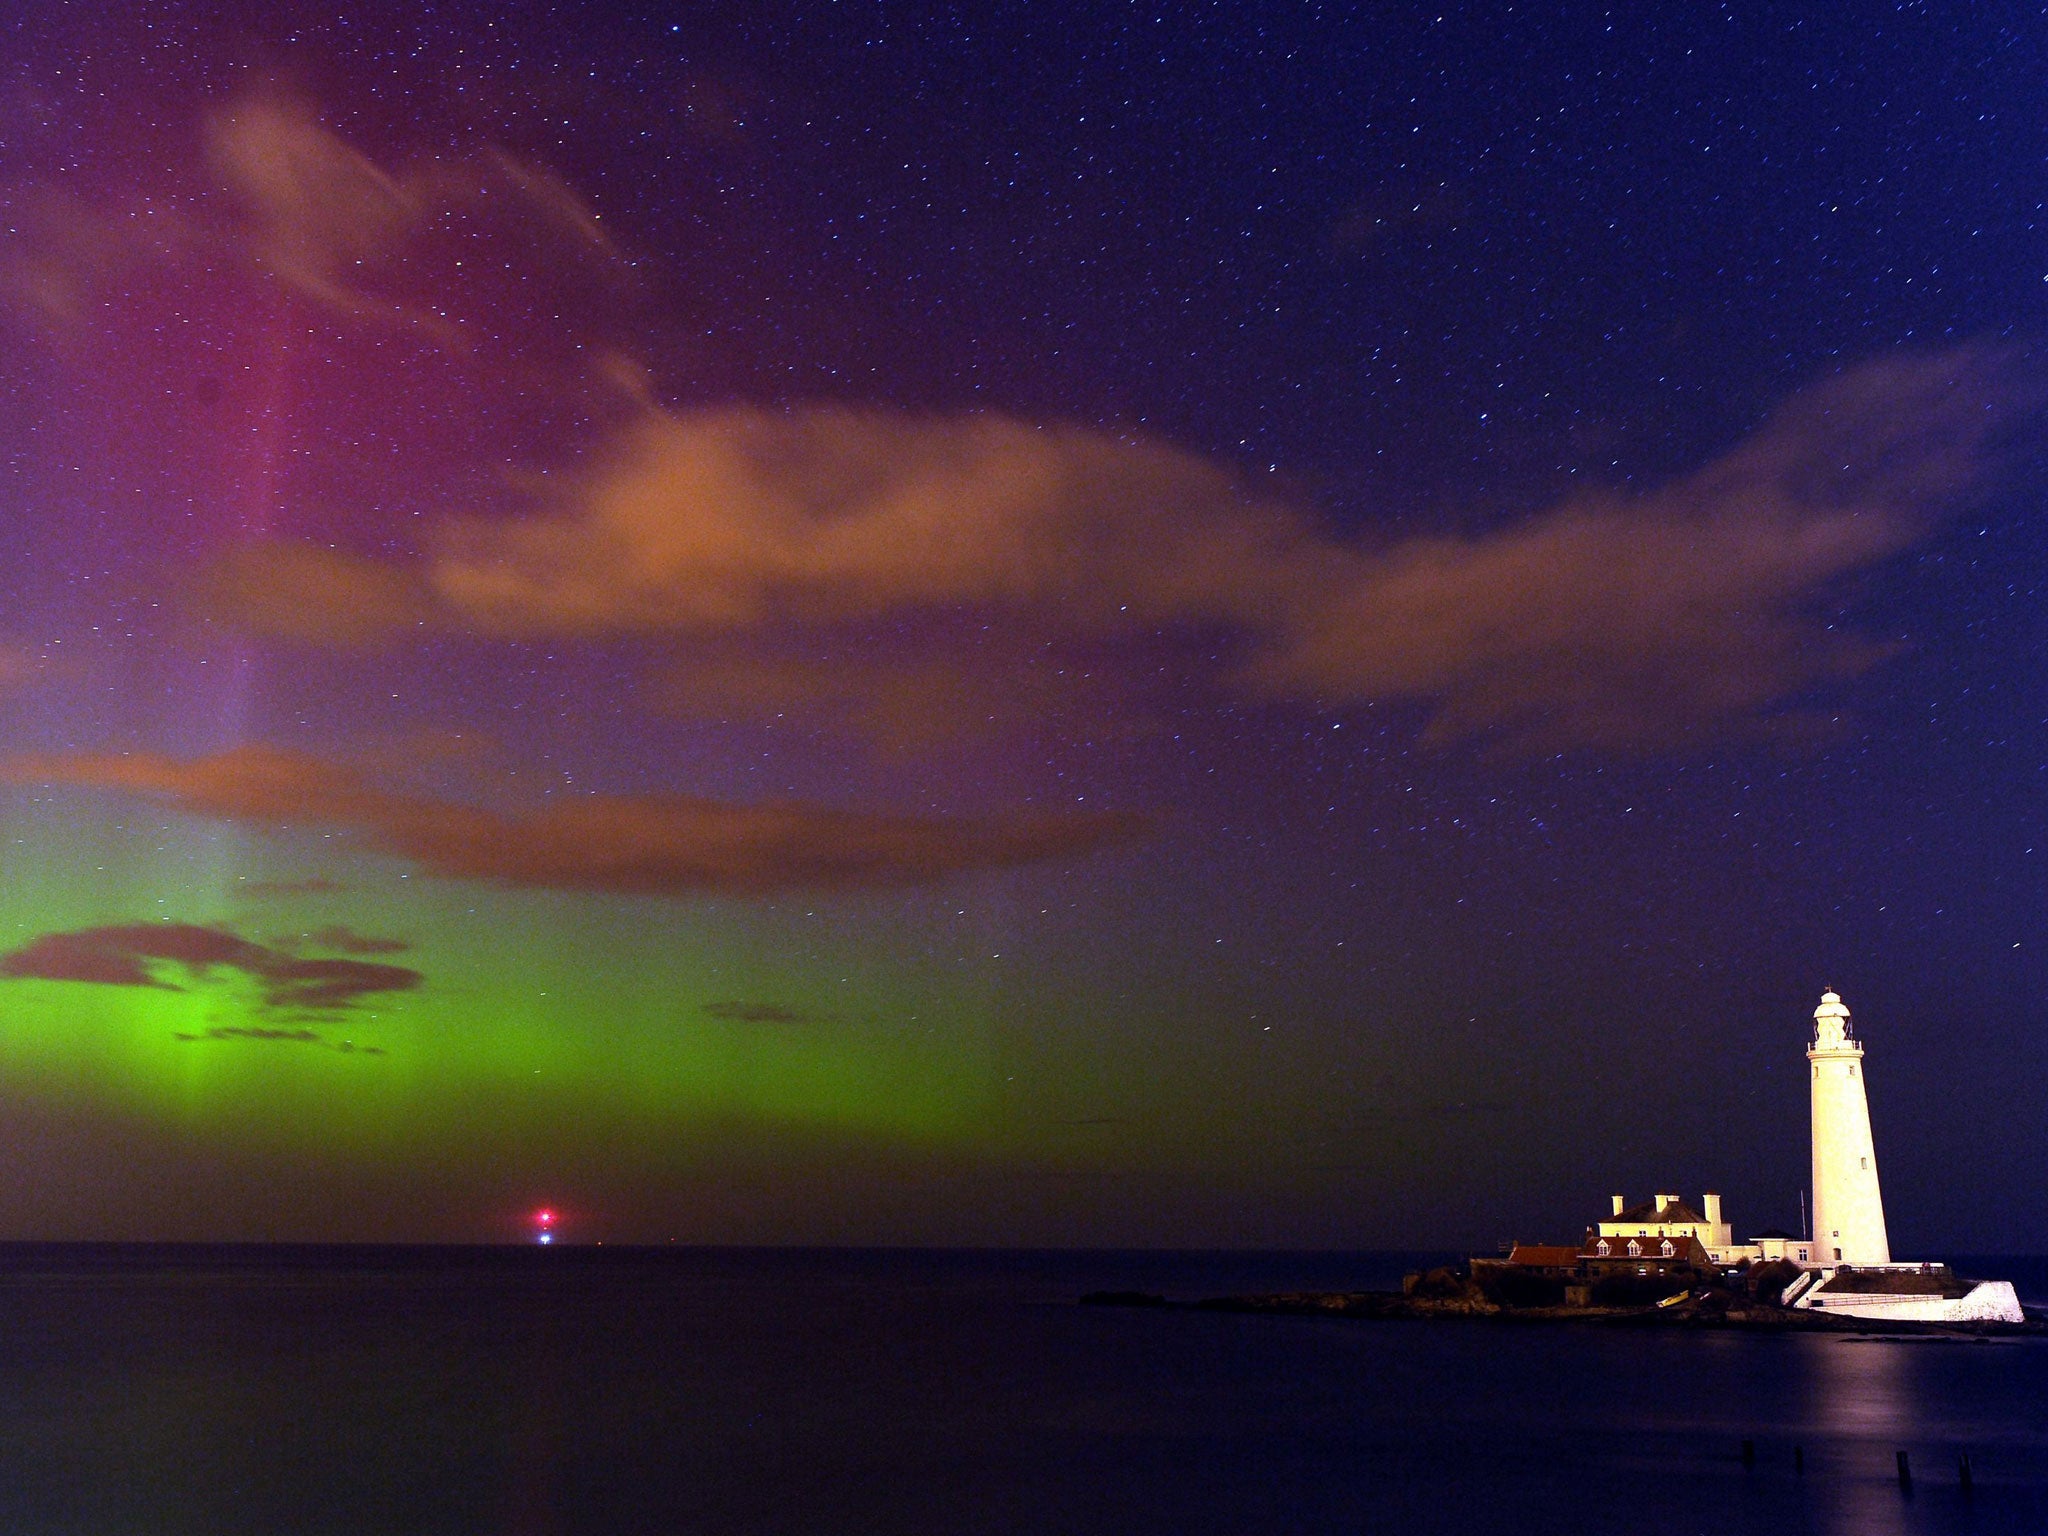 The aurora borealis, or the northern lights as they are commonly known, at St. Mary's Lighthouse and Visitor Centre, Whitley Bay, North Tyneside